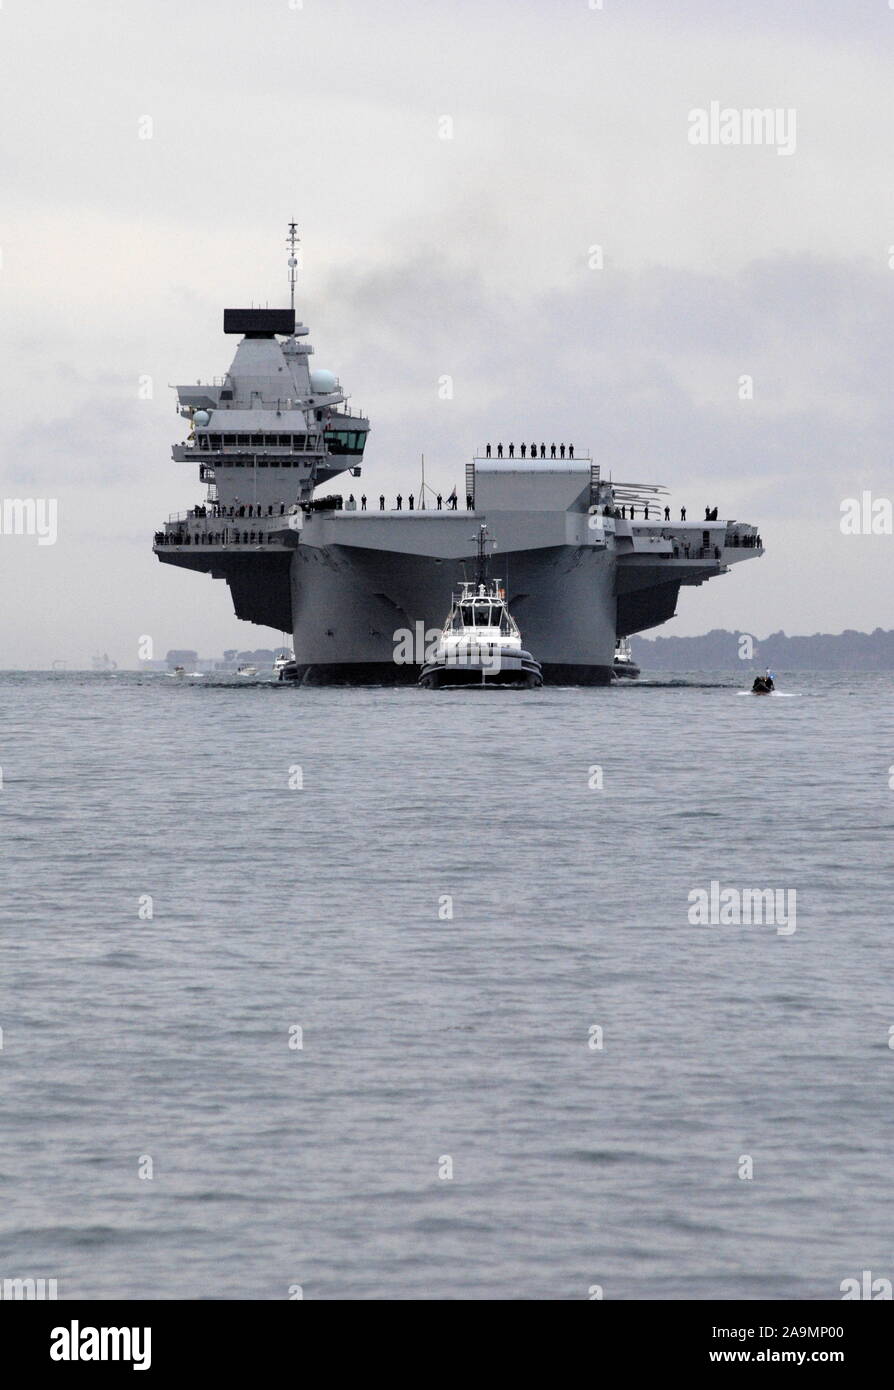 AJAXNETPHOTO. 16TH AUGUST, 2017. PORTSMOUTH, ENGLAND. - ROYAL NAVY'S BIGGEST WARSHIP SAILS INTO HOME PORT - HMS QUEEN ELIZABTH, THE FIRST OF TWO 65,000 TONNE, 900 FT LONG, STATE-OF-THE-ART AIRCRAFT CARRIERS SAILED INTO PORTSMOUTH NAVAL BASE IN THE EARLY HOURS OF THIS MORNING, GENTLY PUSHED AND SHOVED BY SIX TUGS INTO HER NEW BERTH ON PRINCESS ROYAL JETTY. THE £3BN CARRIER, THE LARGEST WARSHIP EVER BUILT FOR THE ROYAL NAVY, ARRIVED AT ARRIVED AT HER HOME PORT TWO DAYS AHEAD OF HER ORIGINAL SCHEDULE.  PHOTO: JONATHAN EASTLAND/AJAX  REF: D171608_6771 Stock Photo